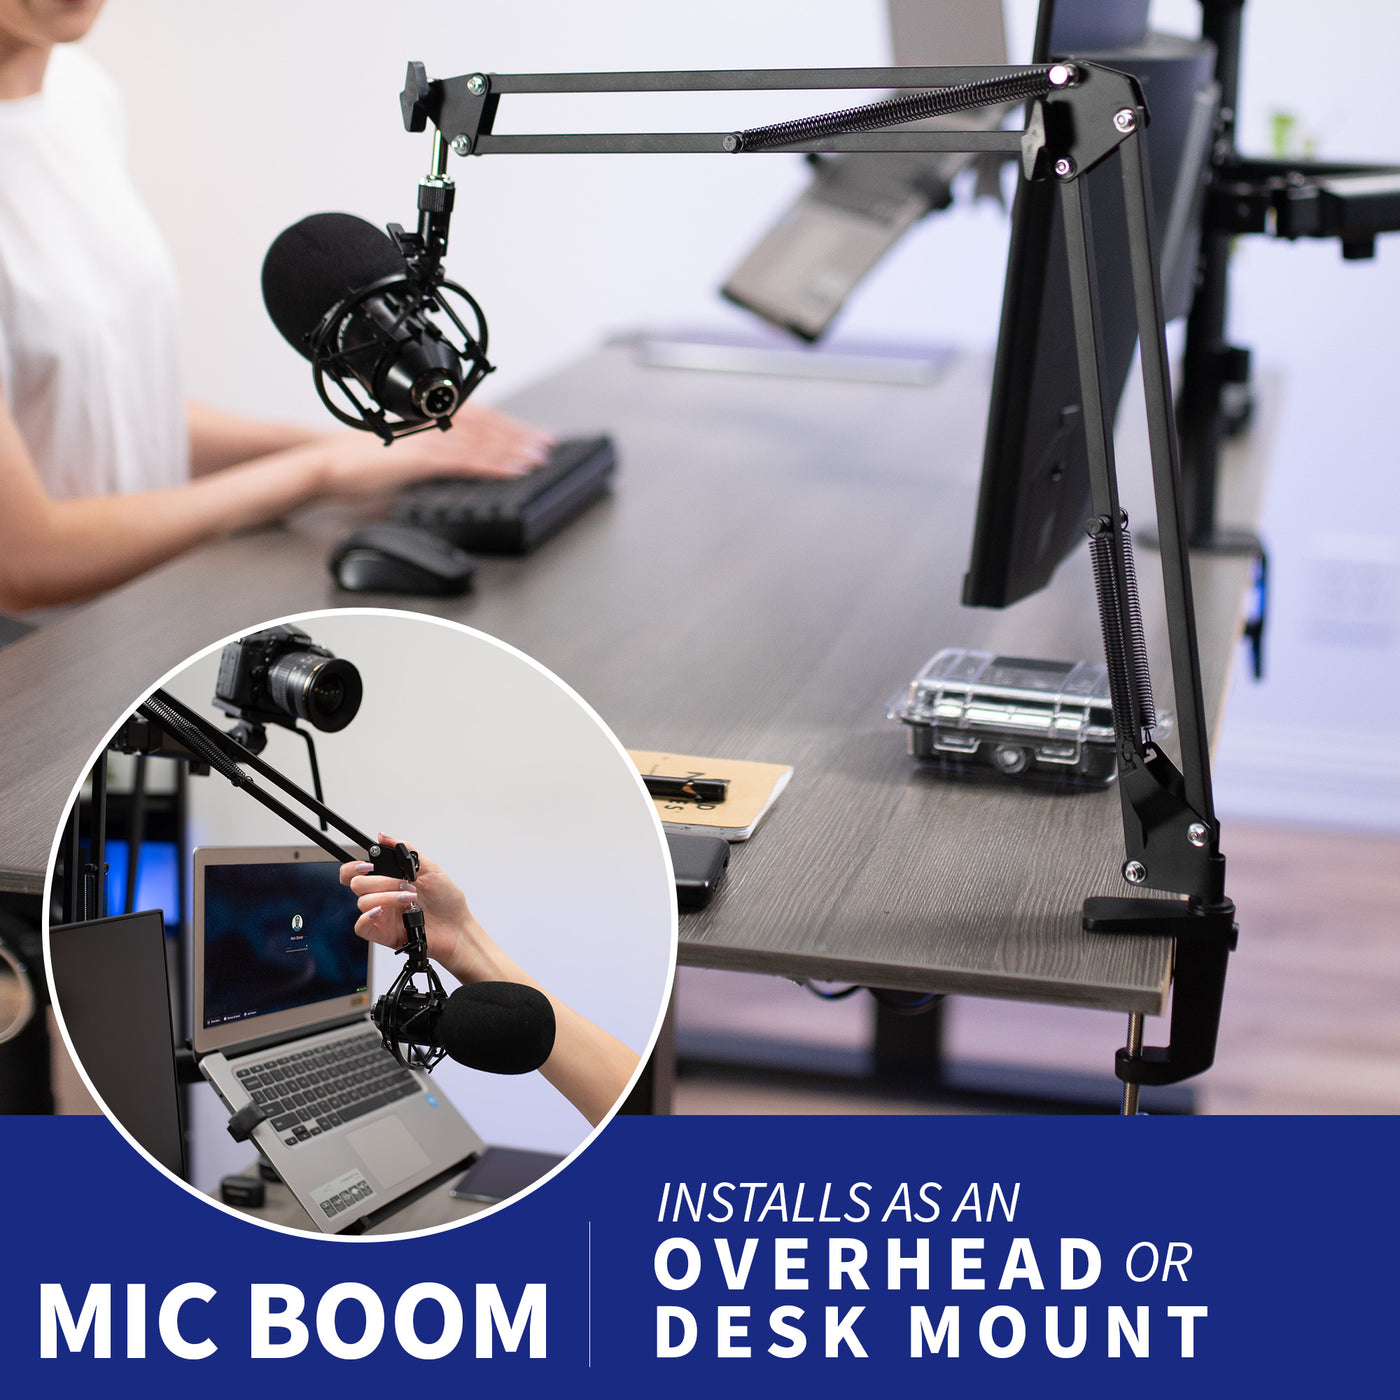 Install the mic boom overhead or clamp on the mount to the side of the desk.